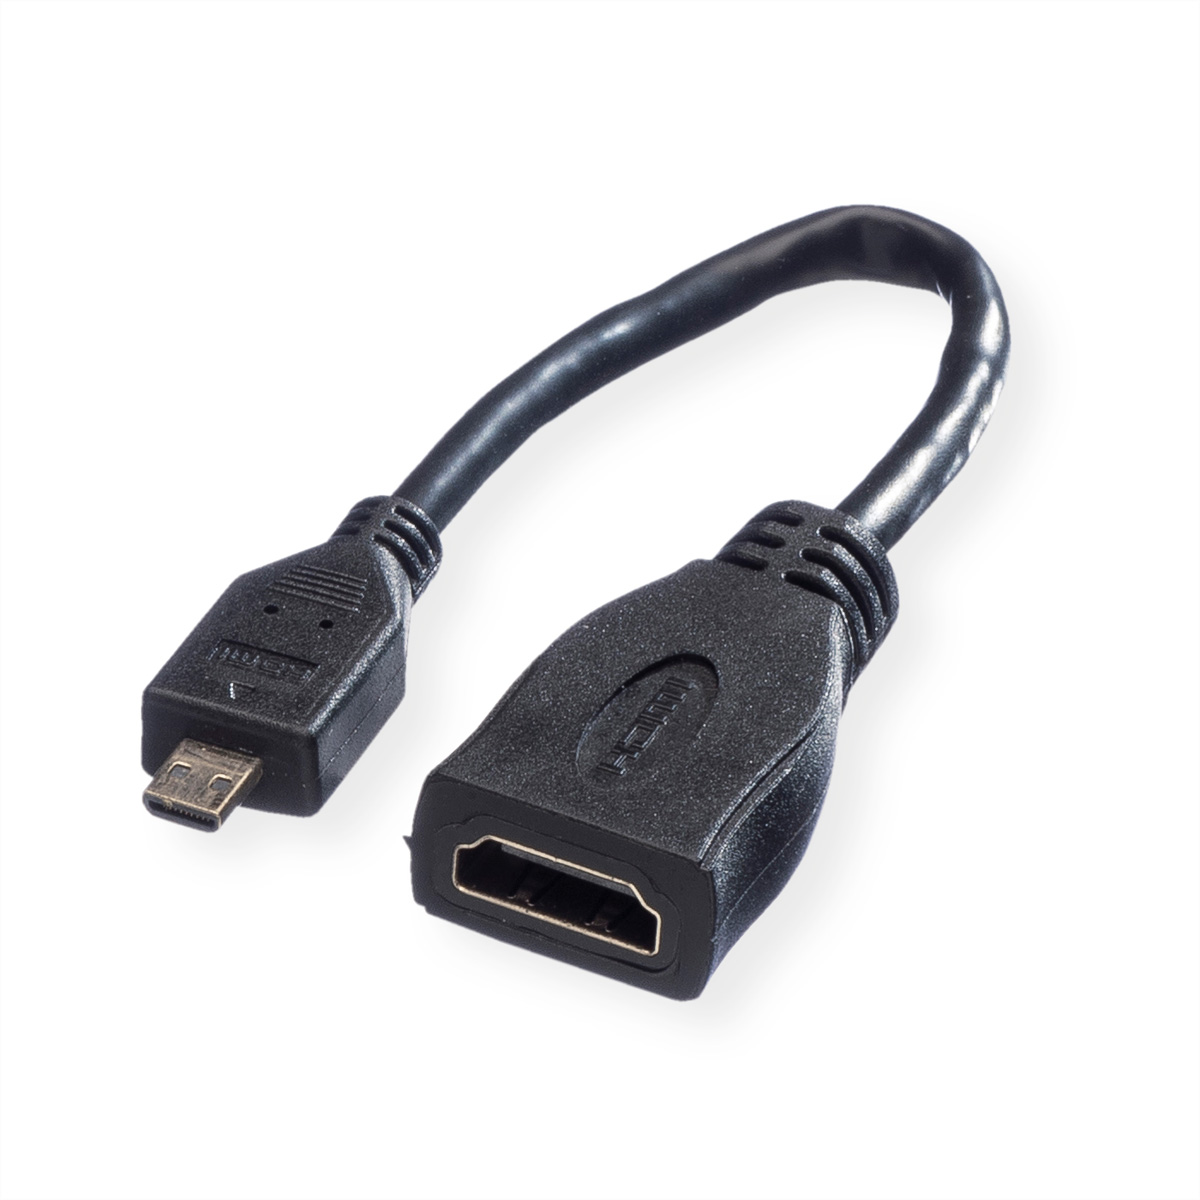 VALUE HDMI High HDMI High Speed Ethernet, ST HDMI Micro mit Kabel Speed BU with - Kabel HDMI Ethernet Micro